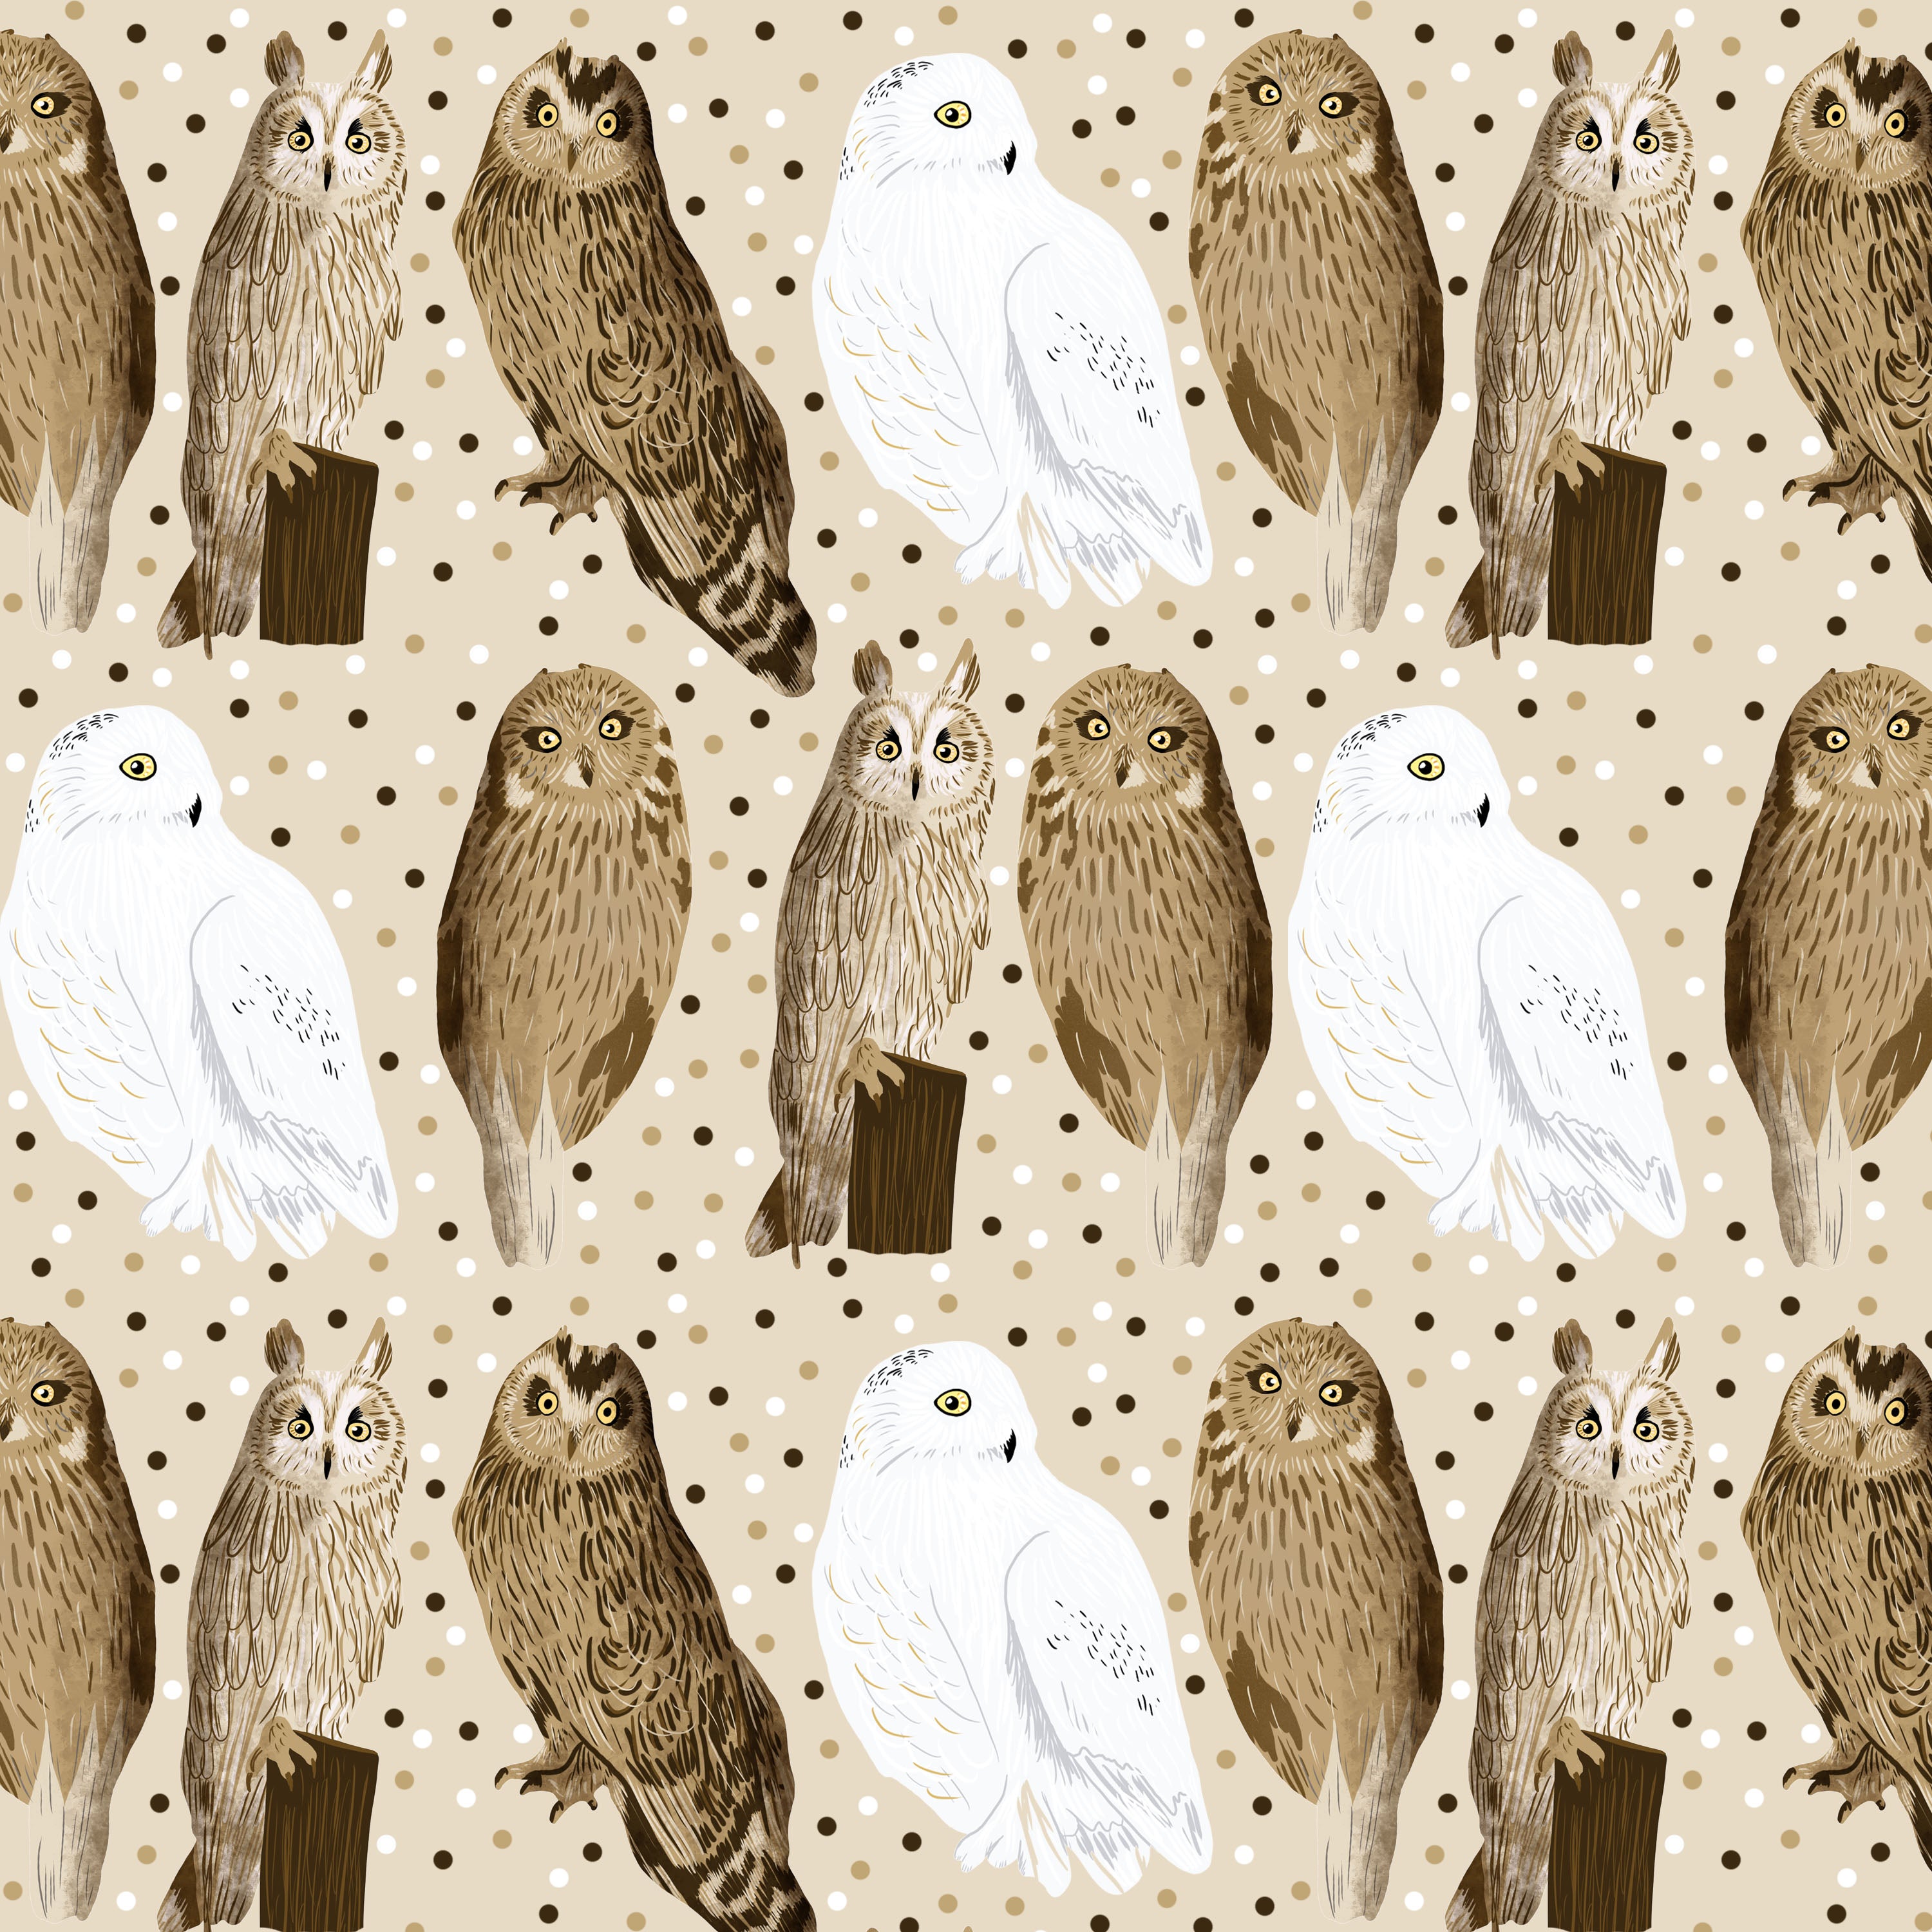 owl surface pattern design with snowy owl, tawny owl and more